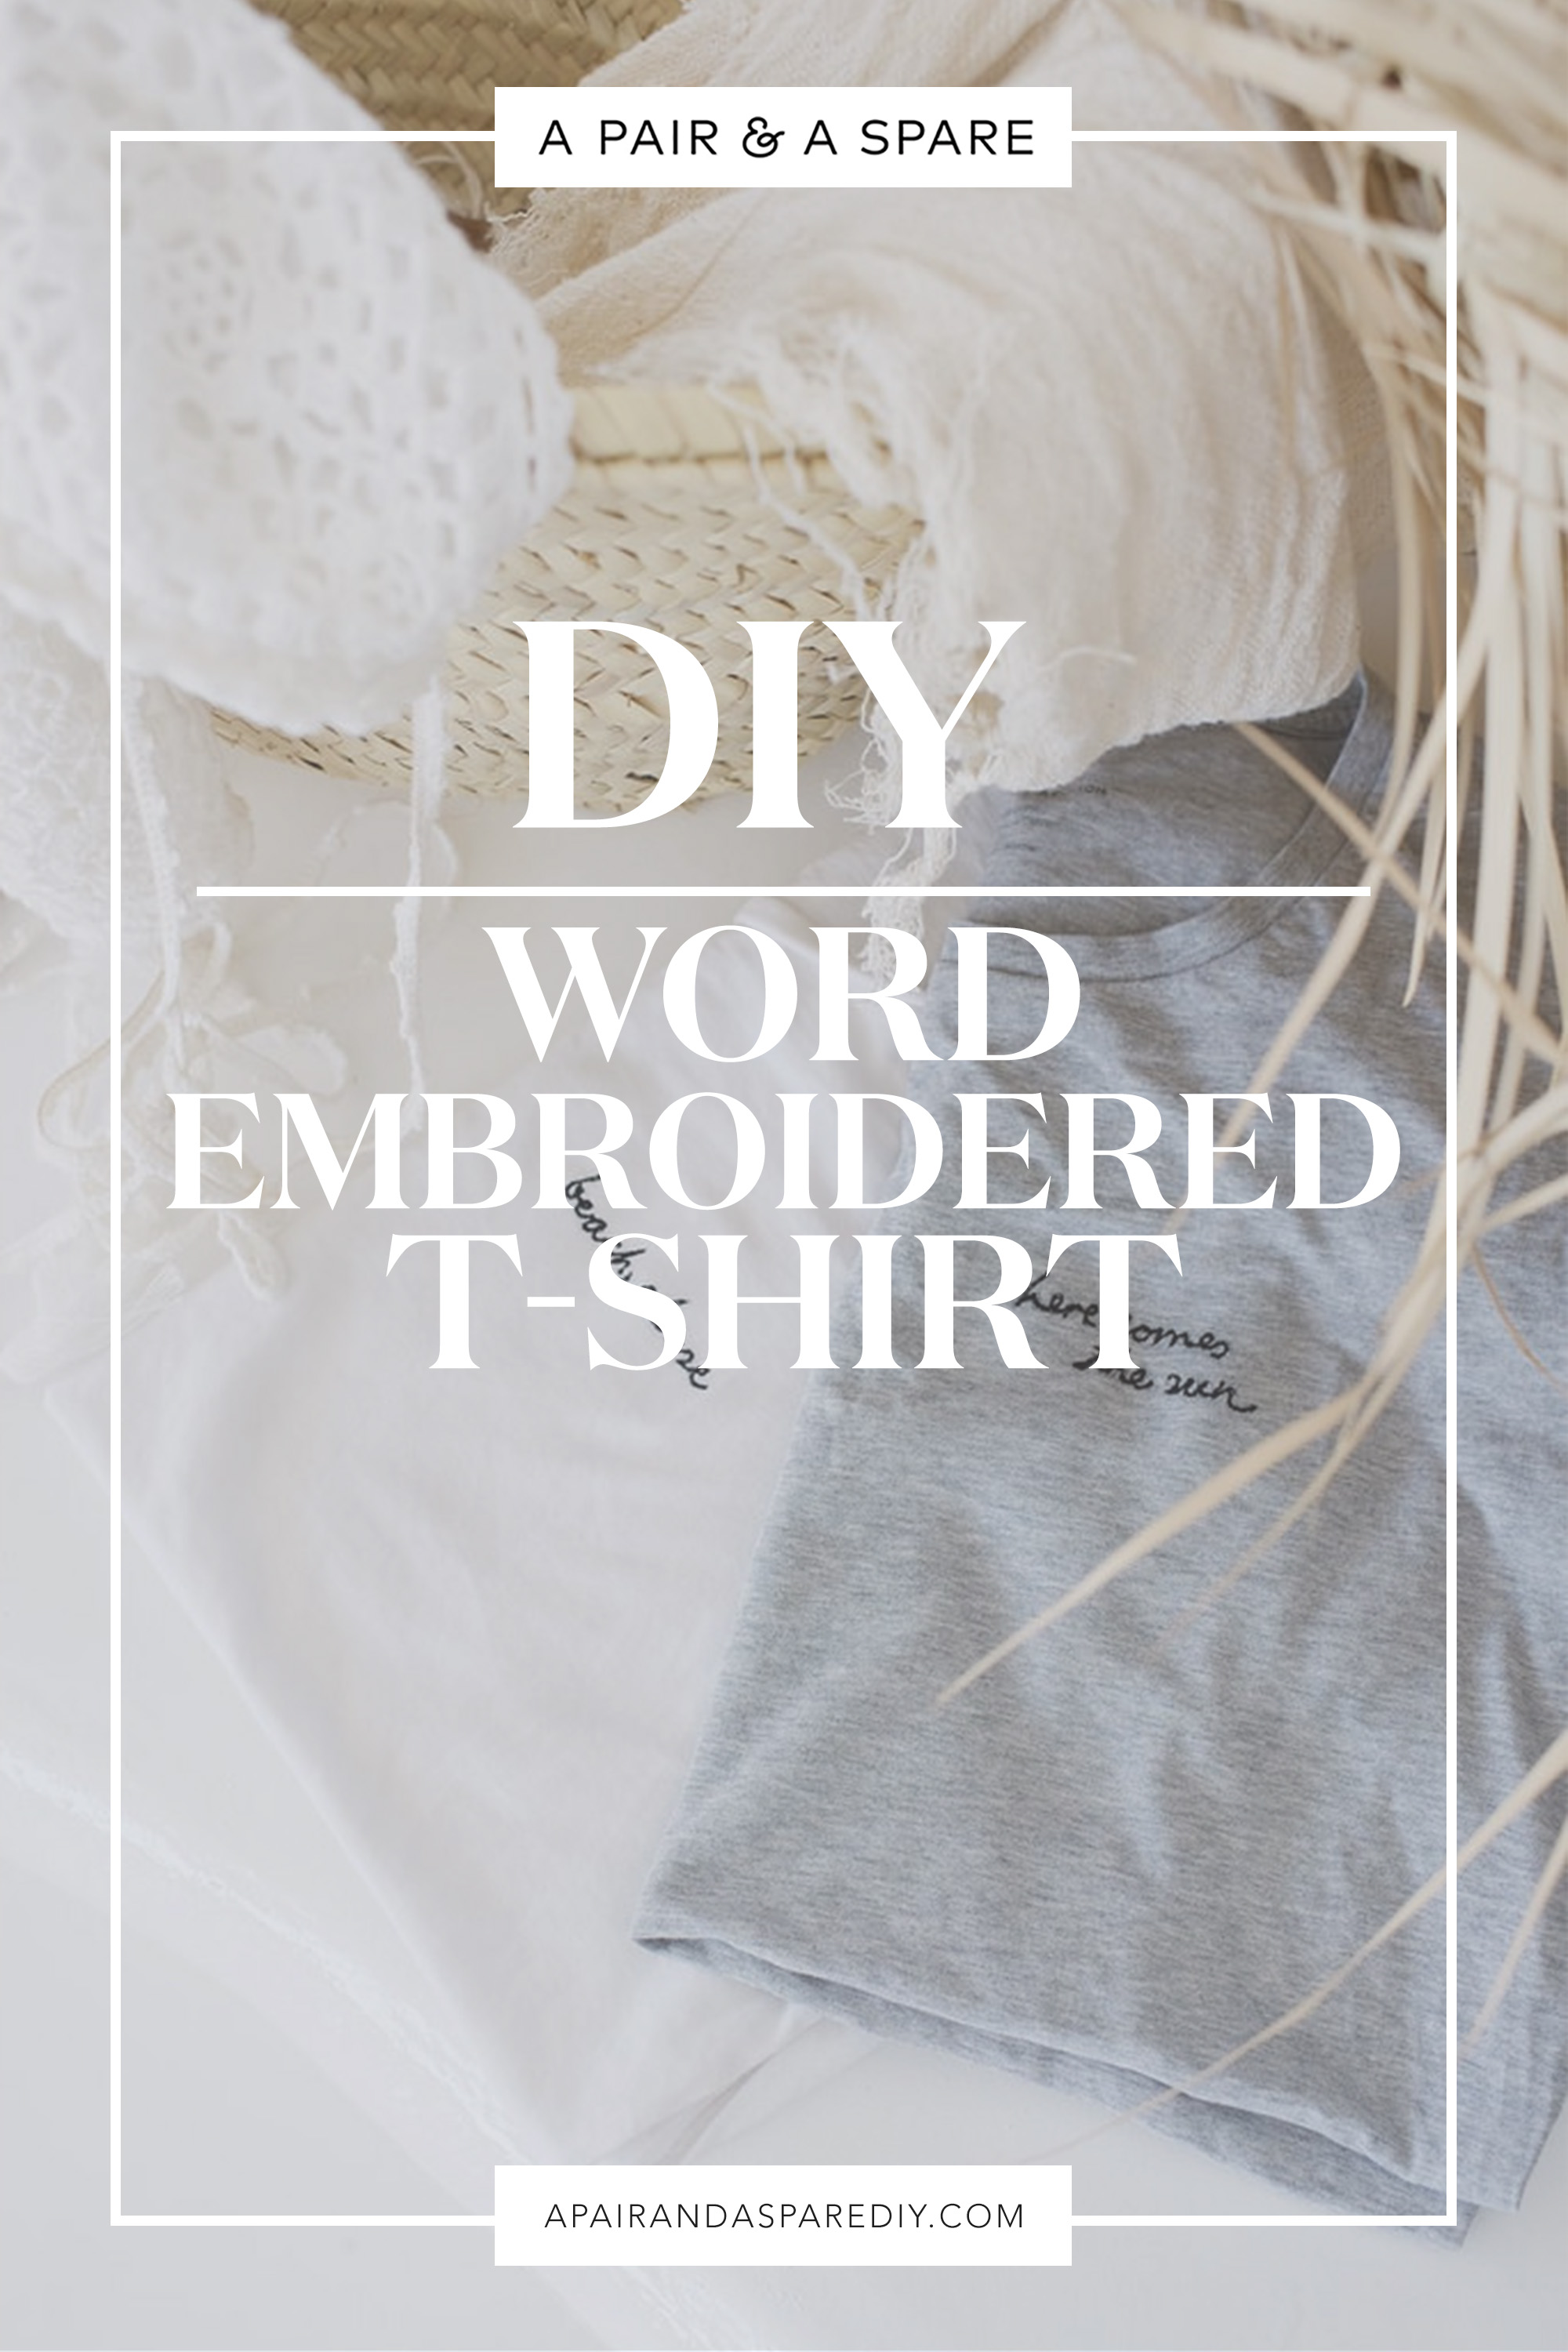 DIY Word Embroidered T-shirt